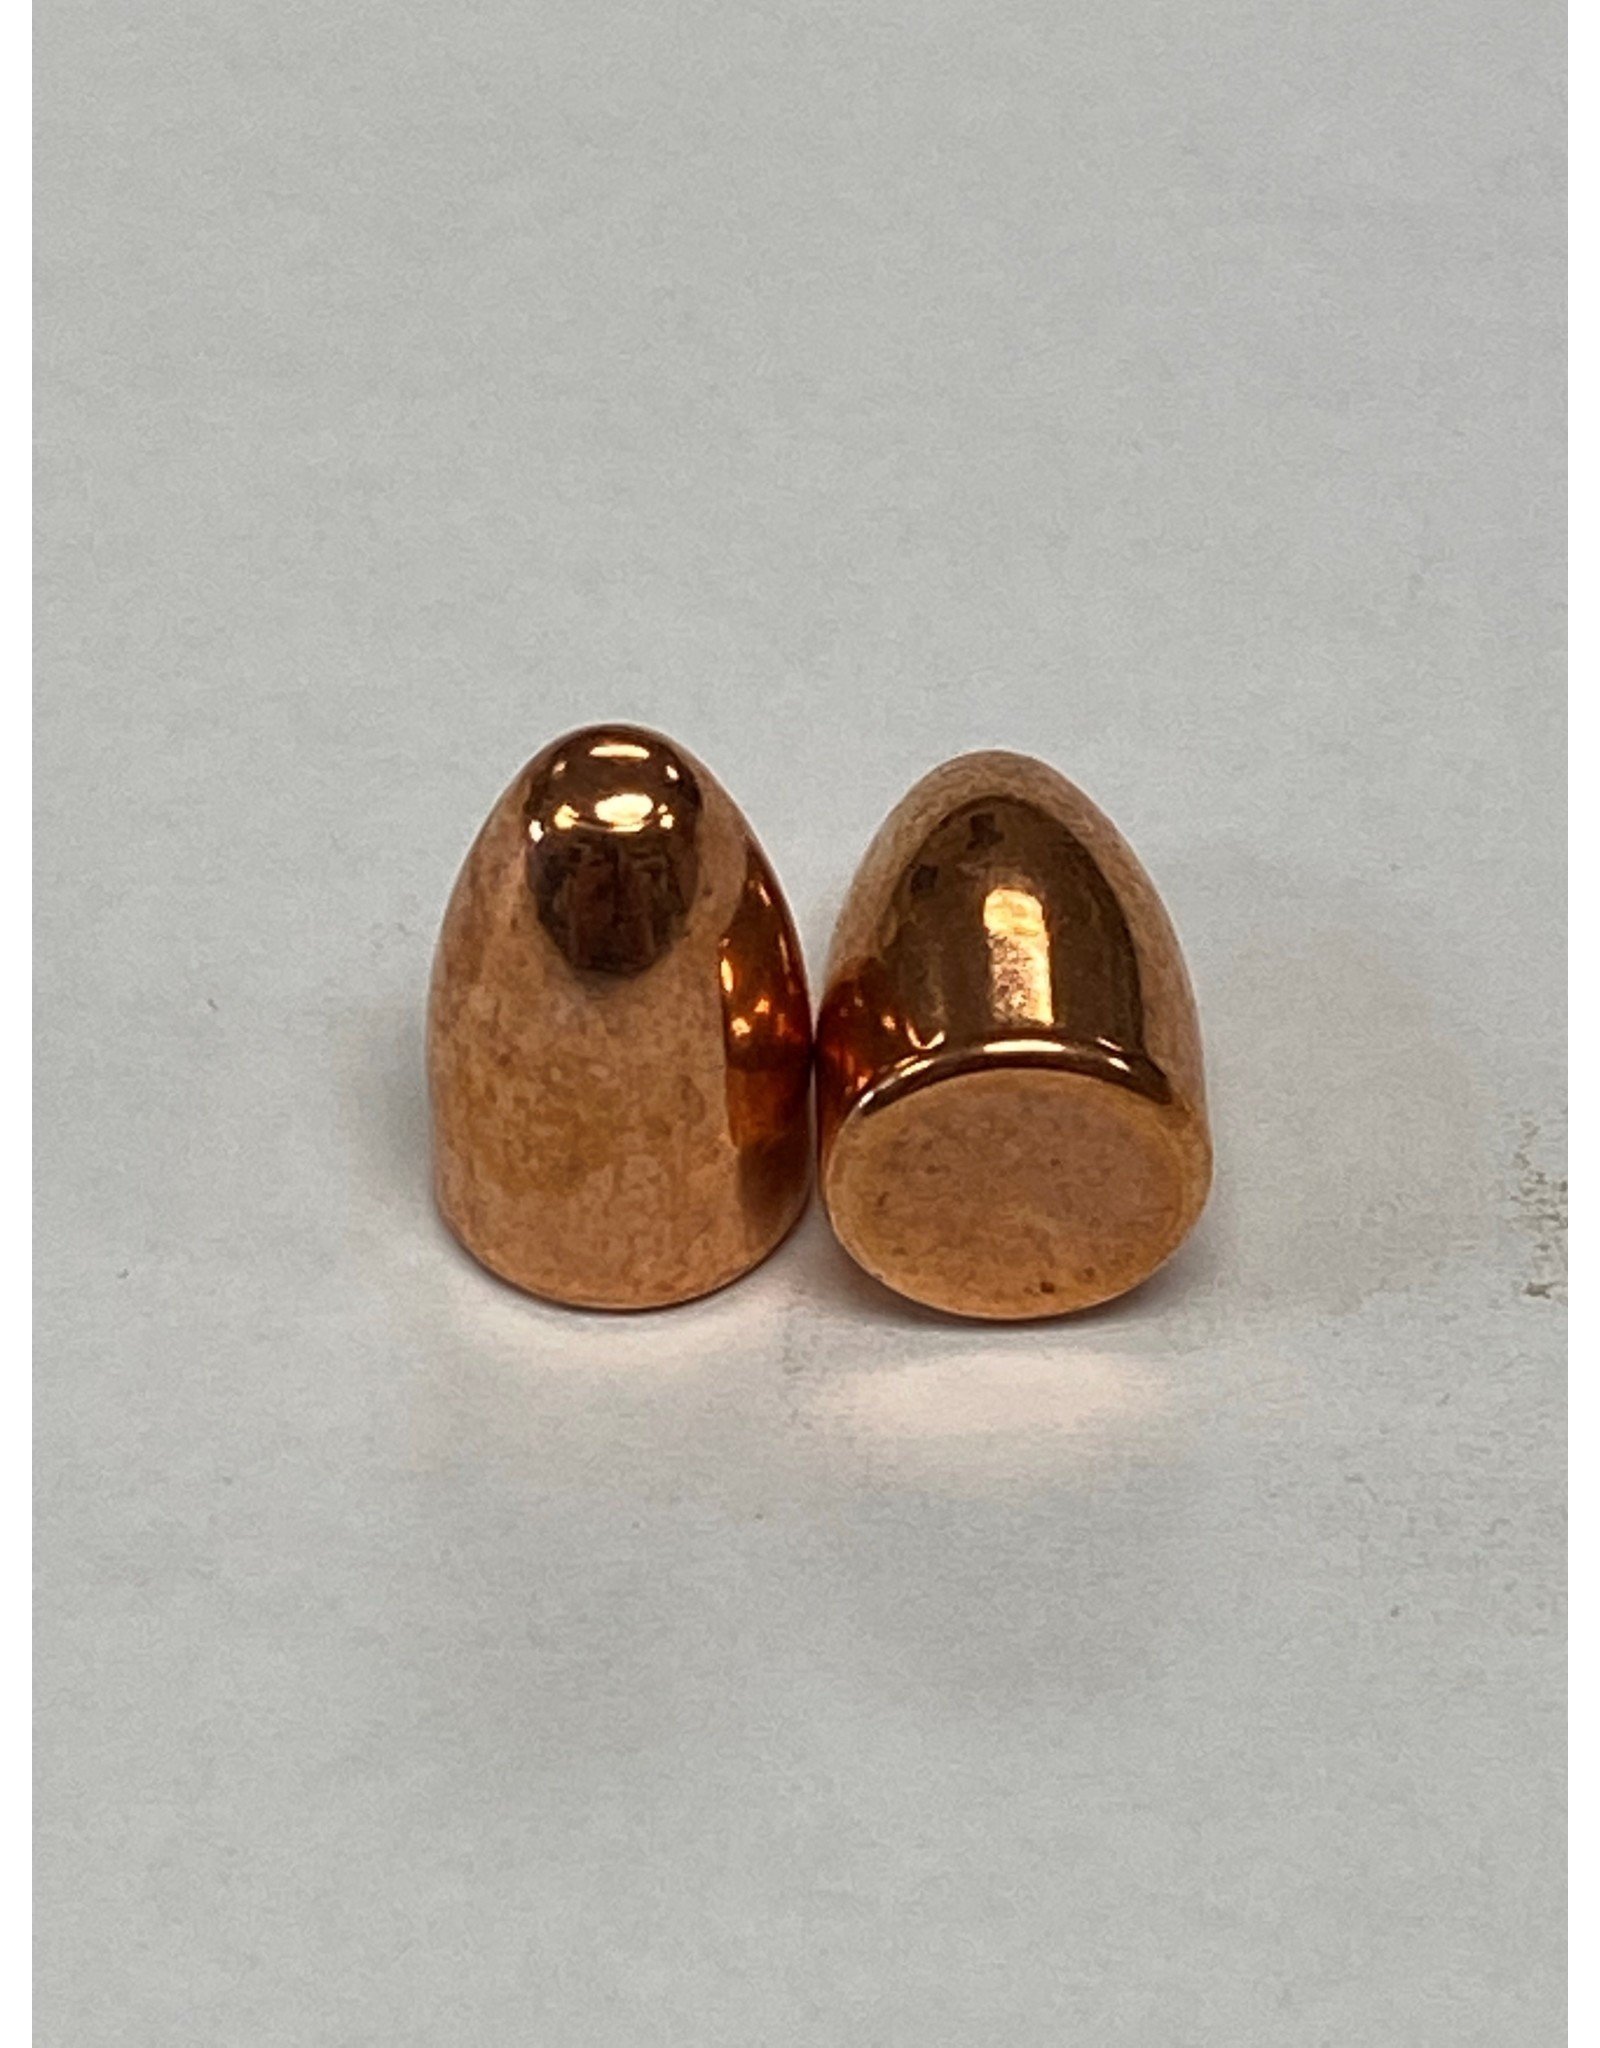 Berry's 9mm 115gr Copper Plated, Round Nose Bullets 1000Rds